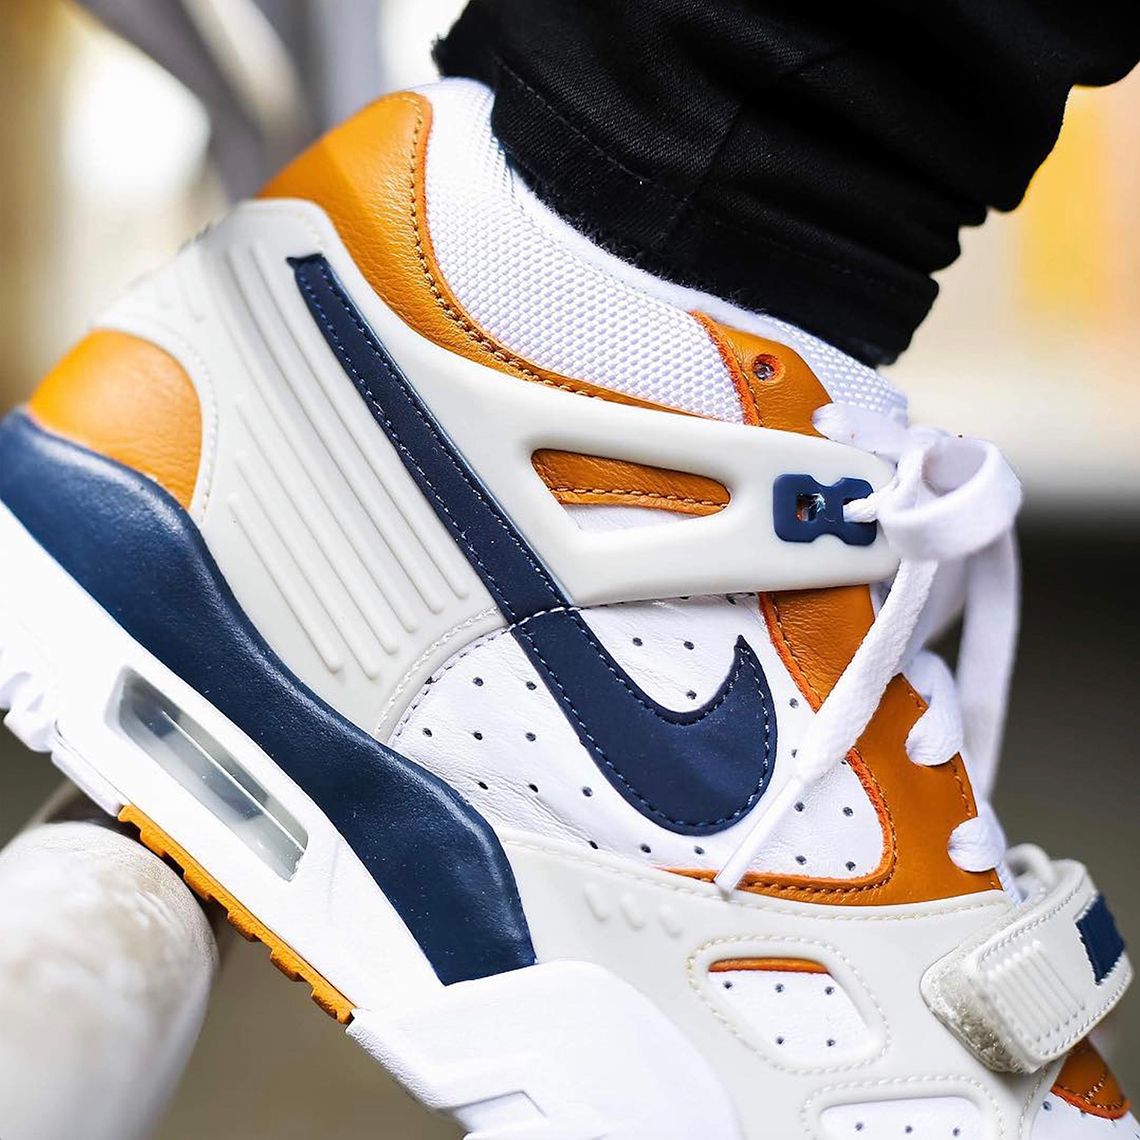 Where to Buy the OG Nike Air Trainer 3 “Medicine Ball” | House of Heat°